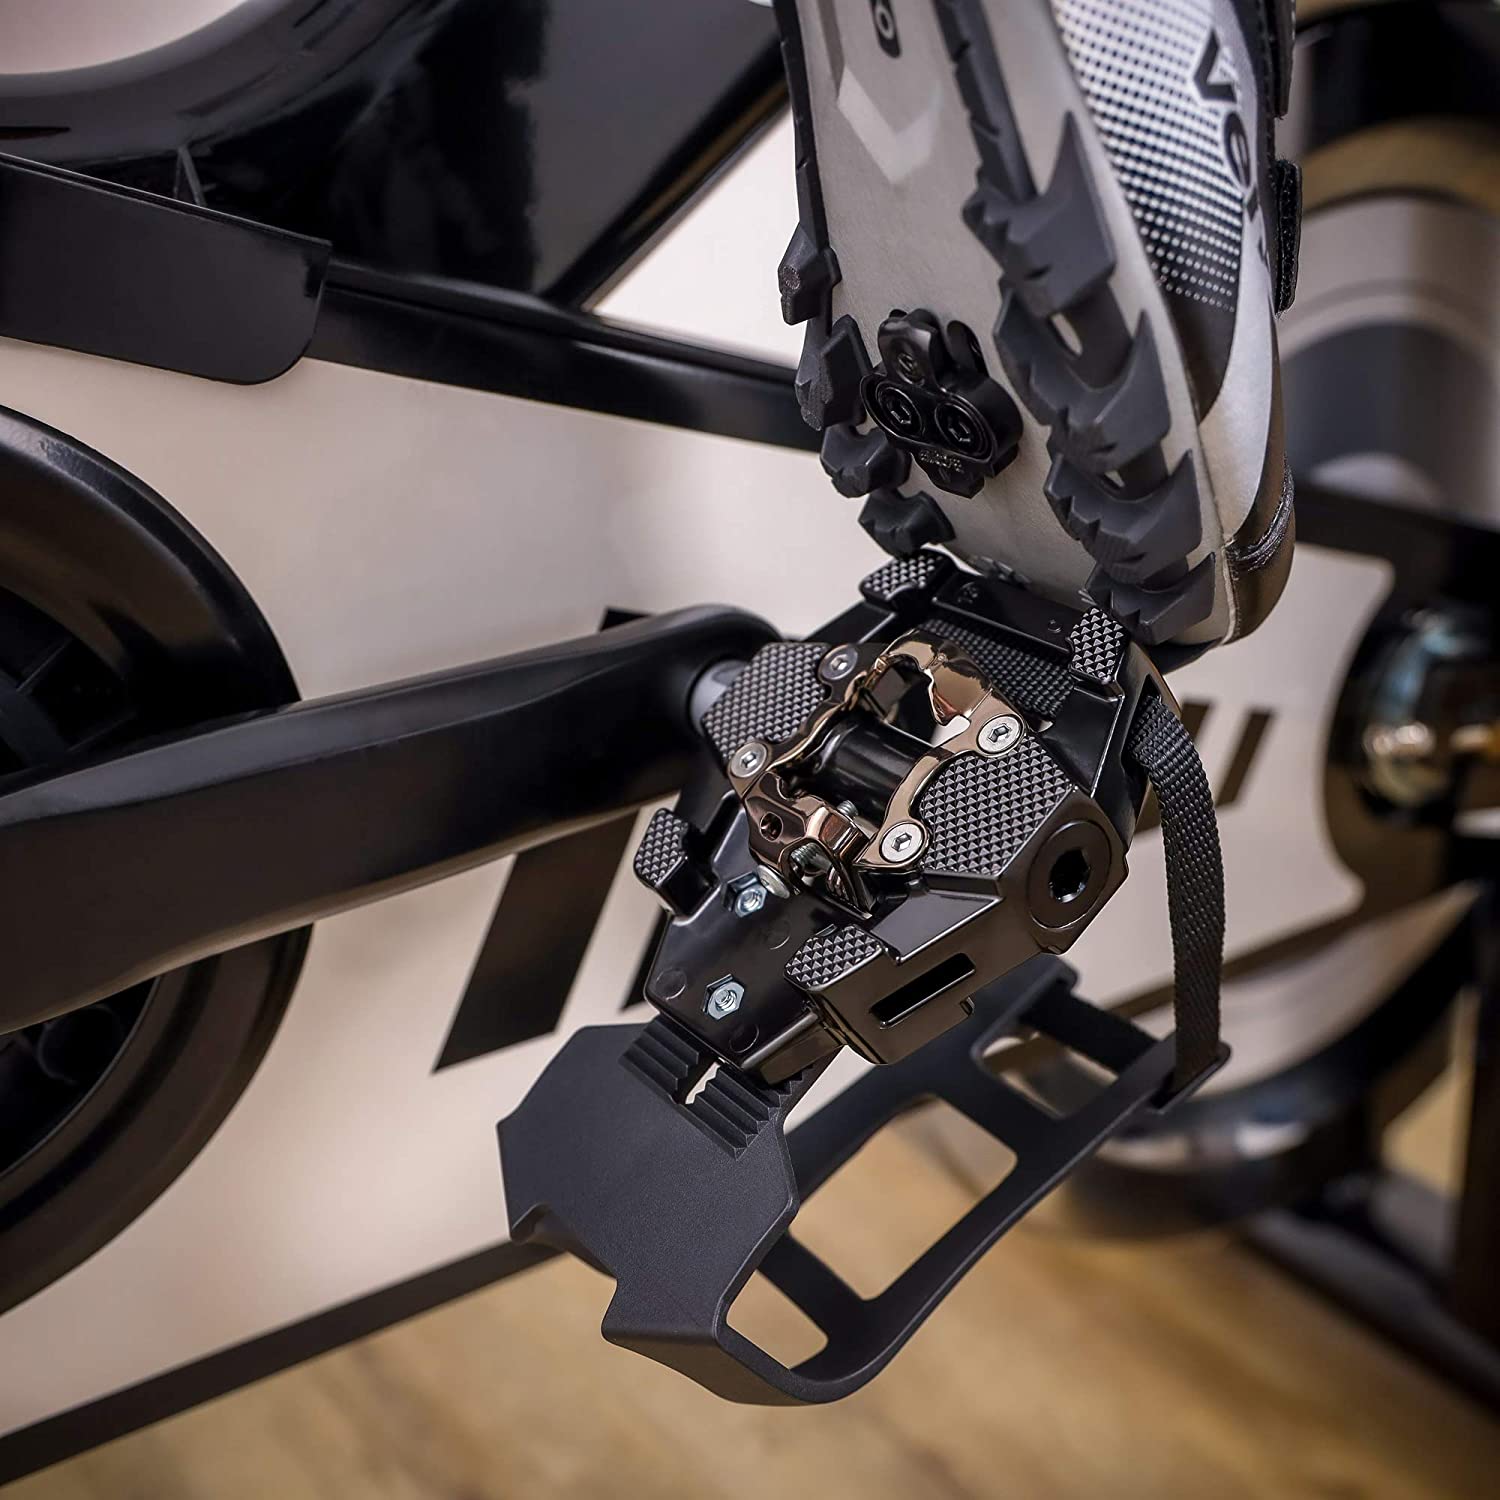 Hybrid pedals give you the option of using either type of pedal depending on where you are riding.